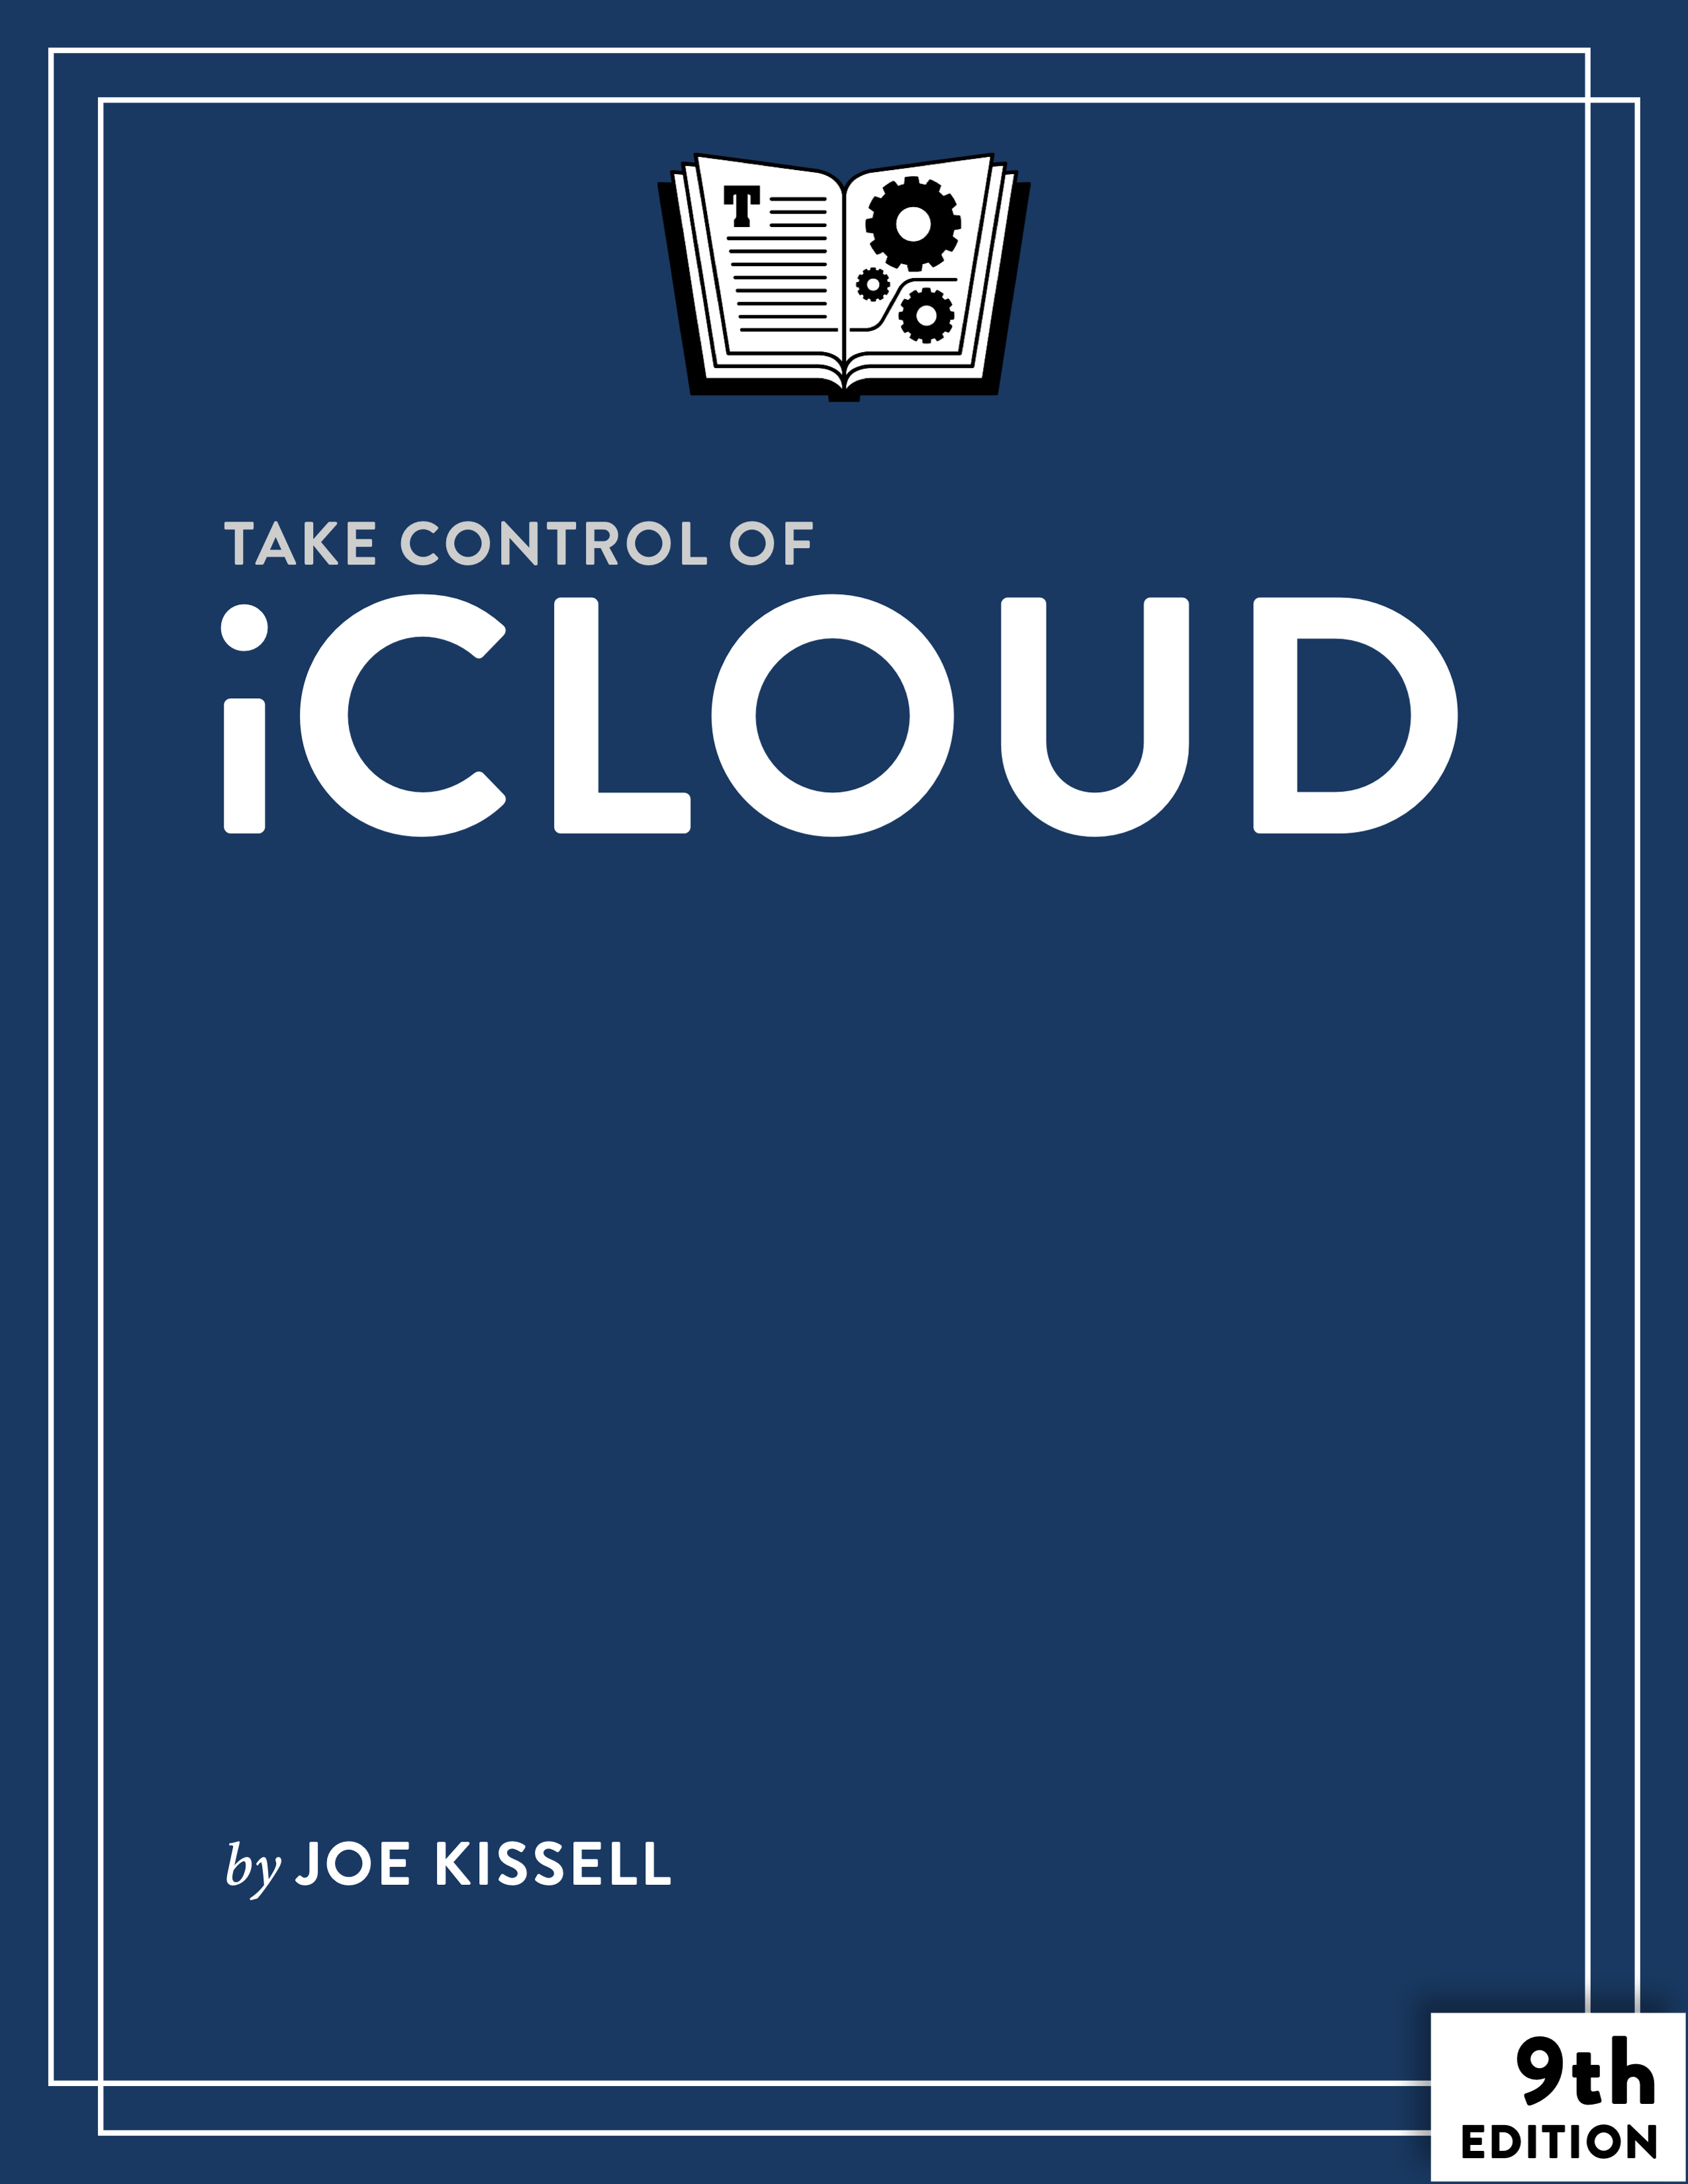 Take-Control-of-iCloud-9.0-cover.png